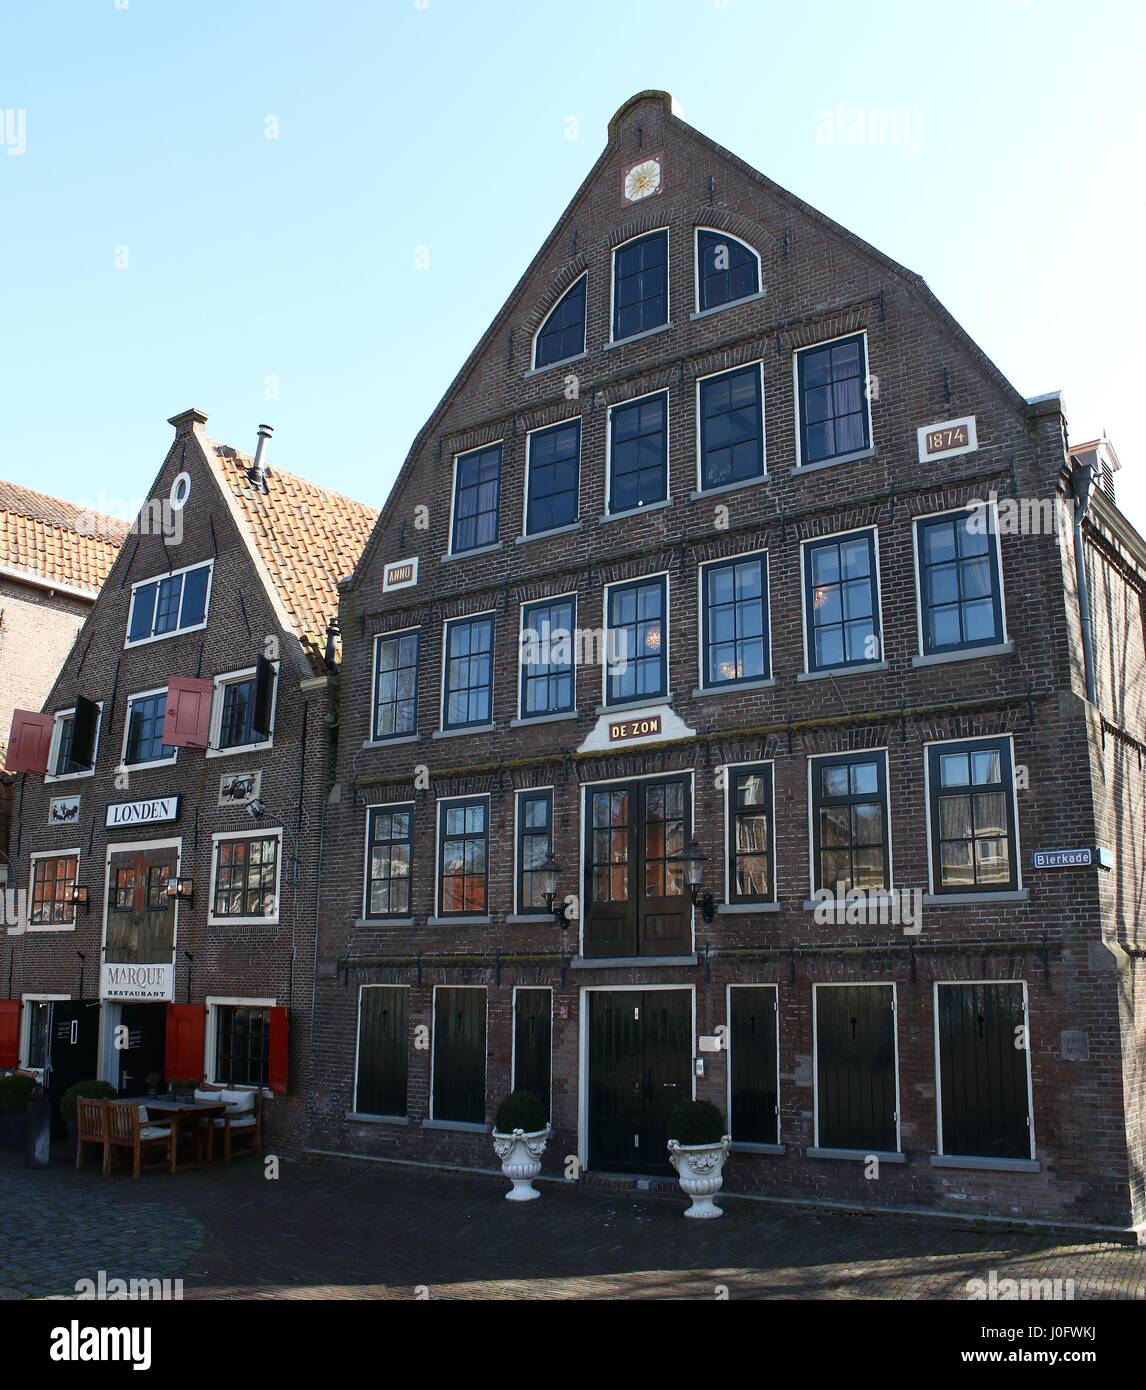 Old warehouses De Zon and Londen along medieval Appelhaven and Bierkade canal, centre of Hoorn, North Holland, Netherlands. (Stitch of 2 images.) Stock Photo